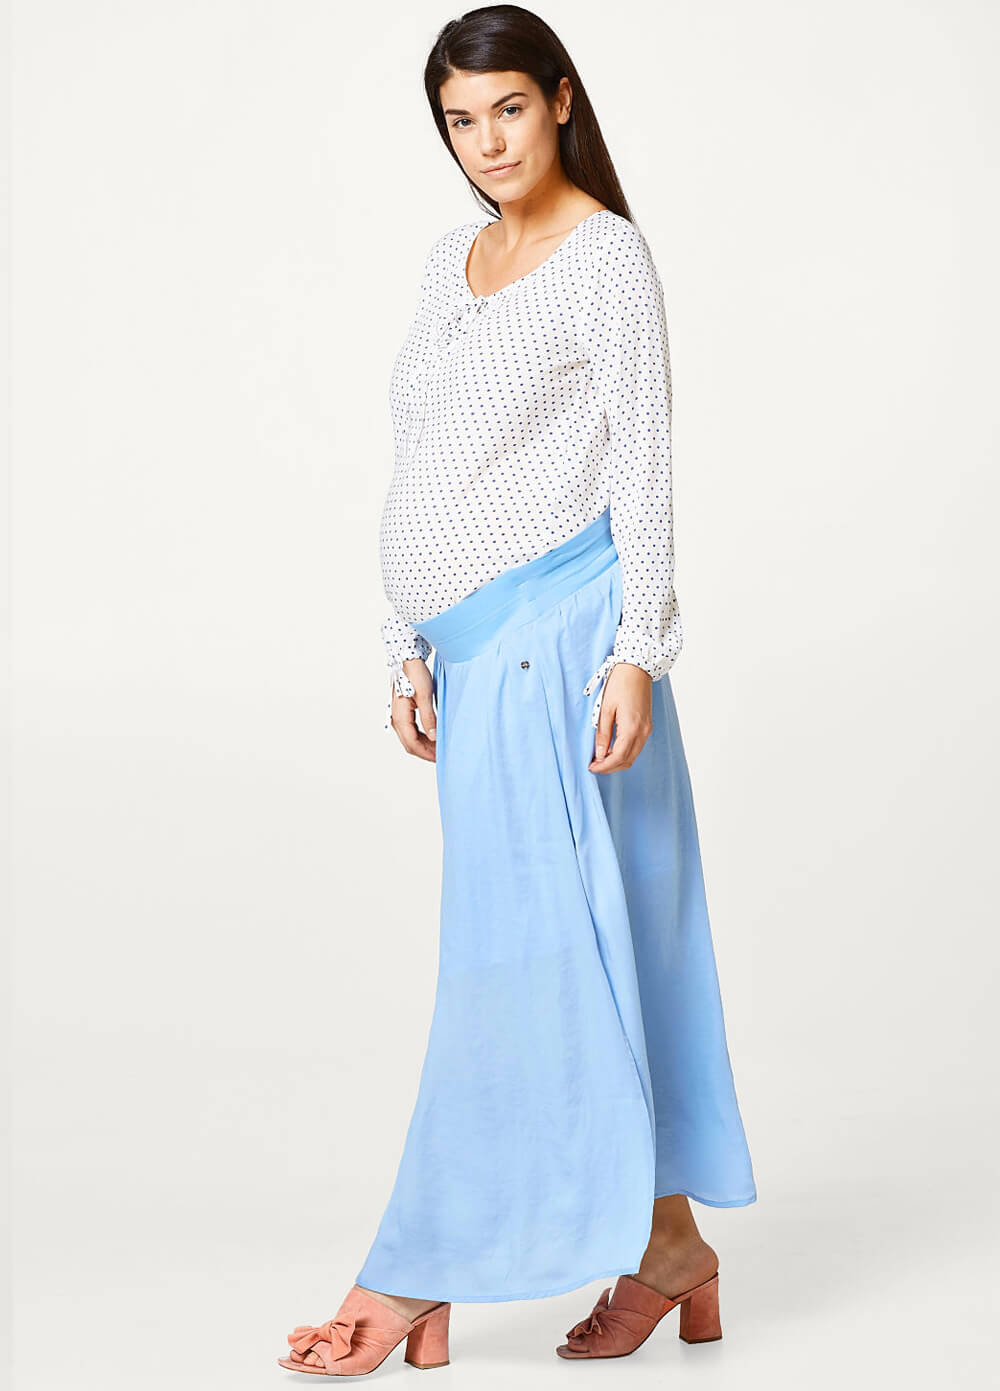 Sky Blue Gathered Maxi Maternity Skirt by Esprit